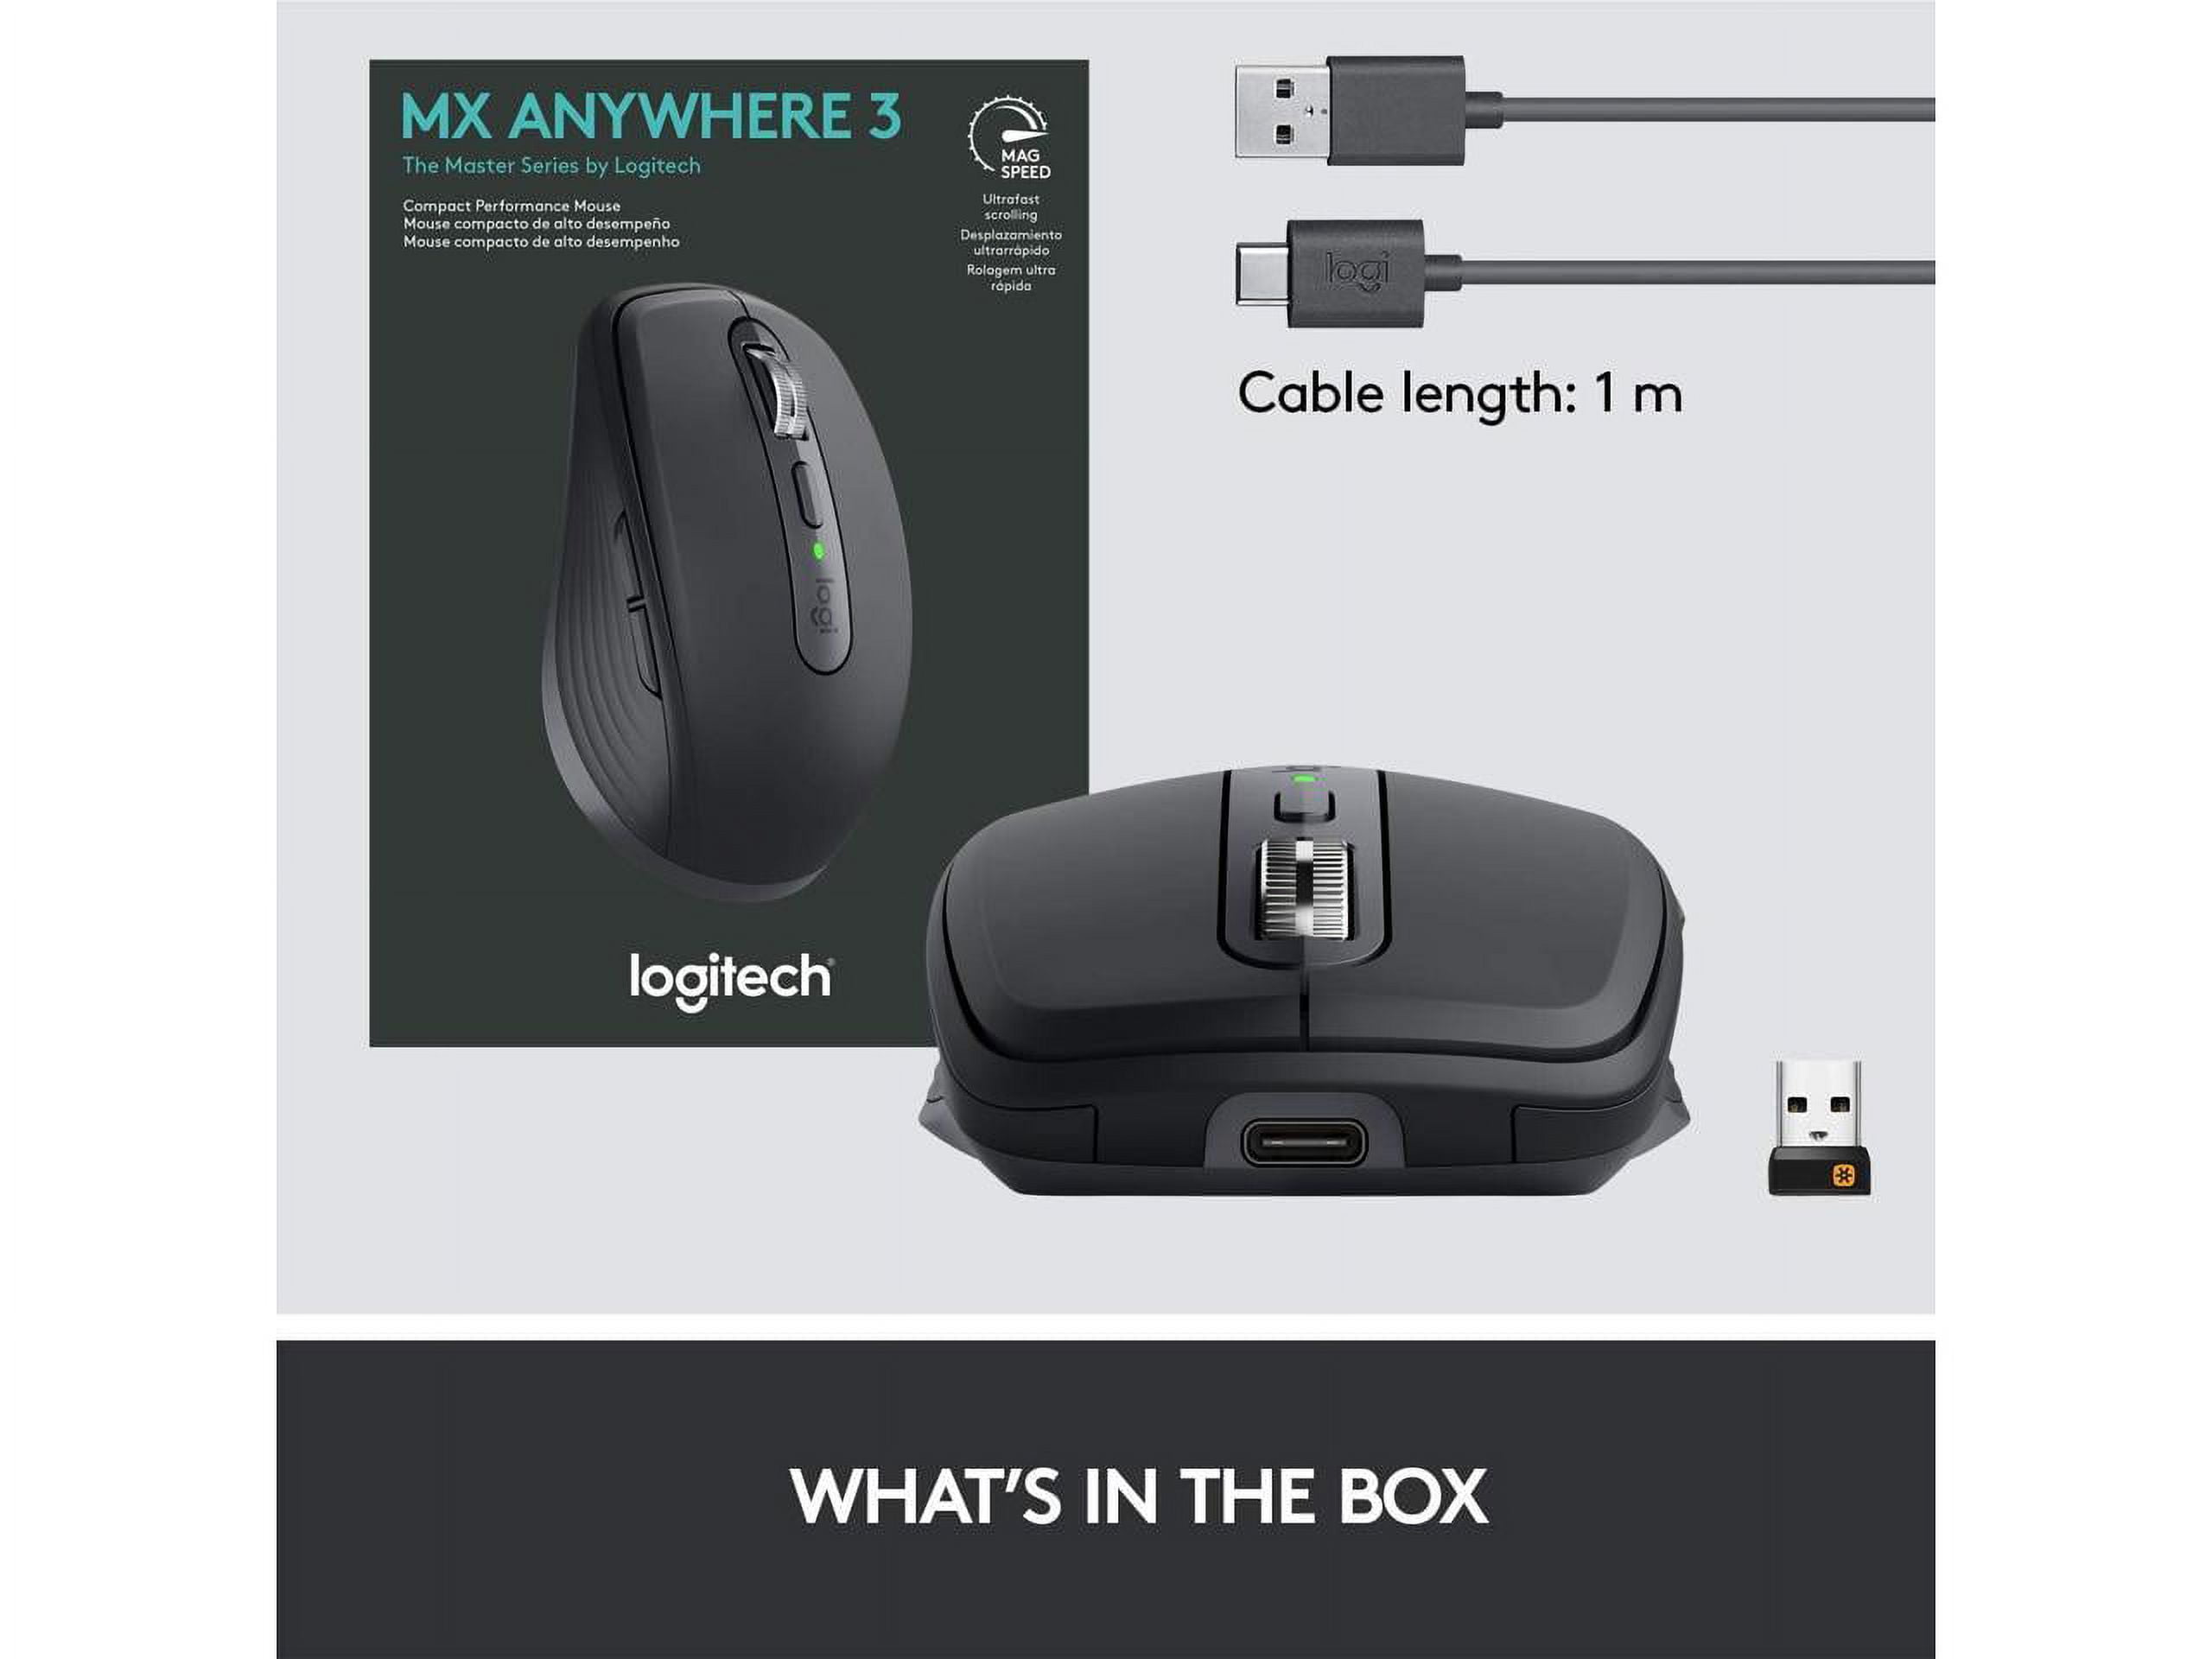 Logitech MX ANYWHERE 3 (910005987) Wireless Standard Mouse for sale online